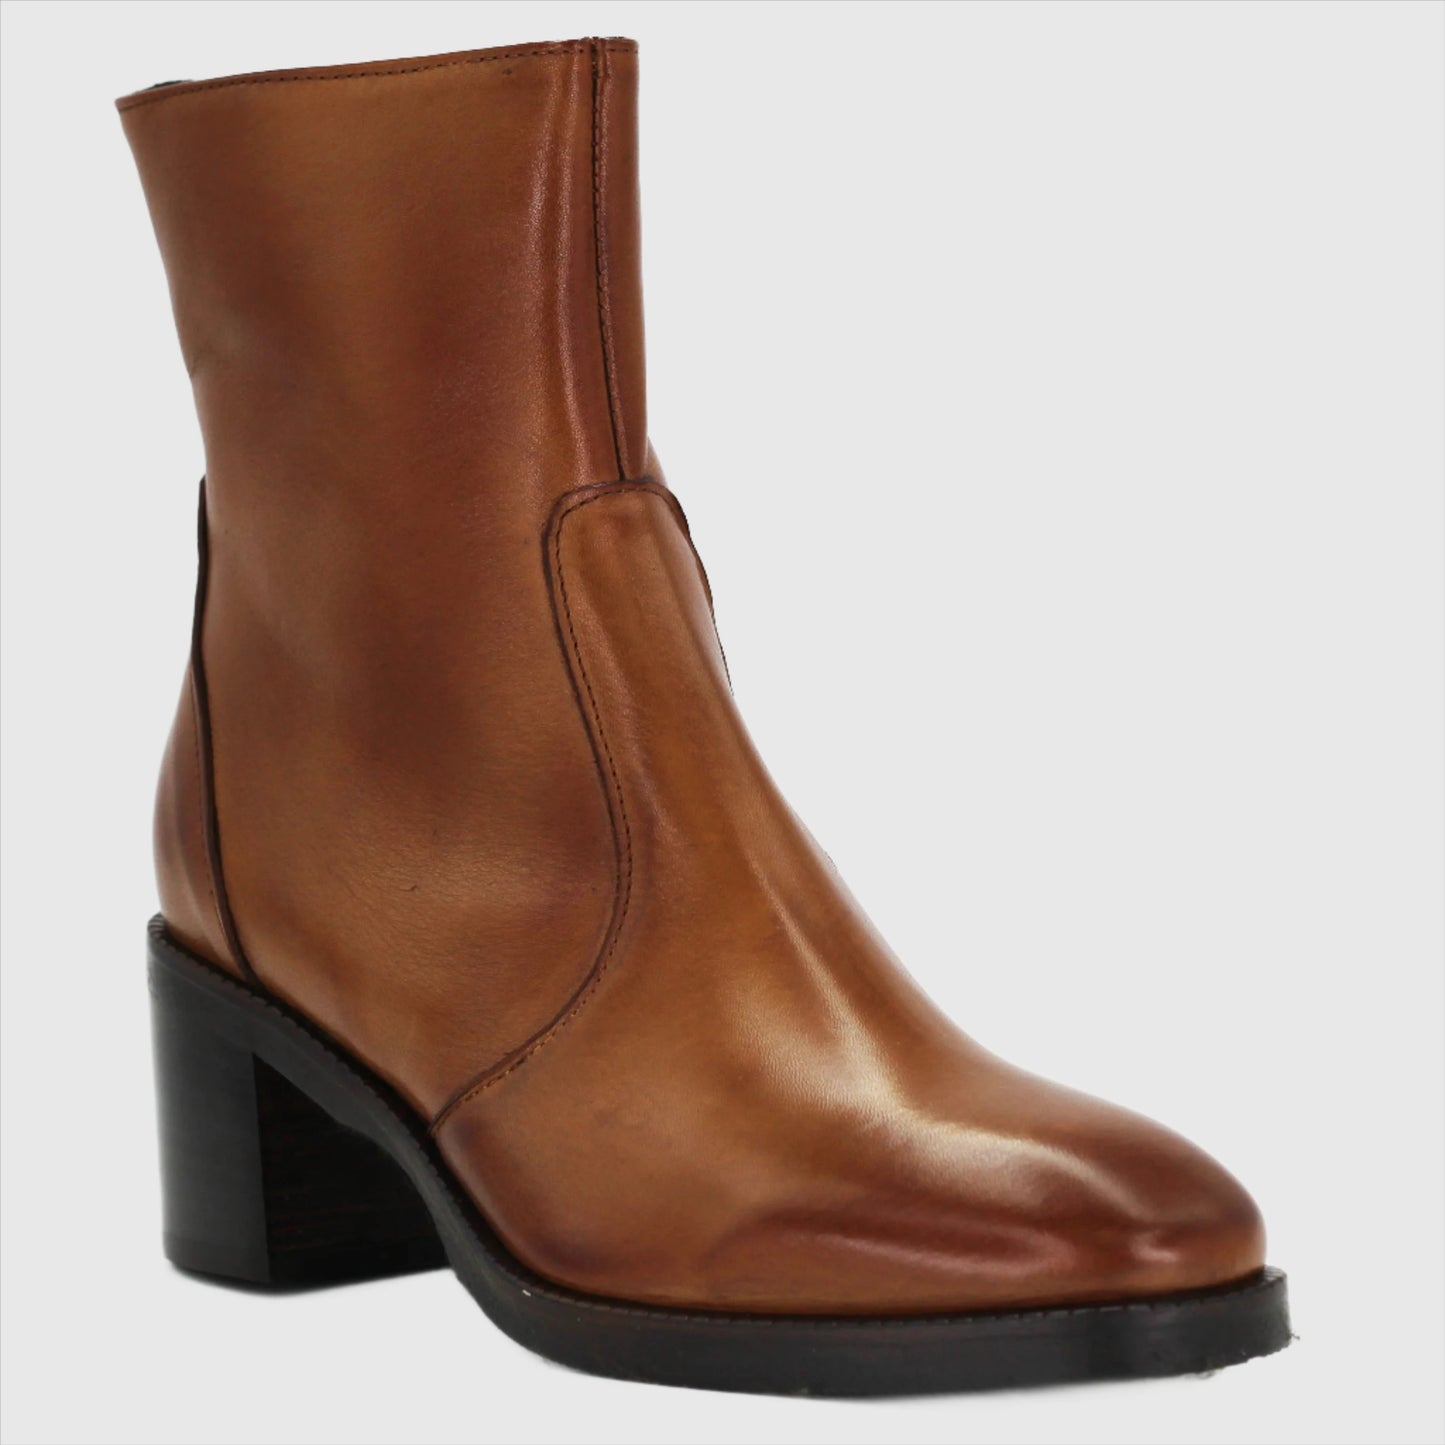 Shop Handmade Italian Leather heeled boot in tabacco (GC2411) or browse our range of hand-made Italian shoes in leather or suede in-store at Aliverti Cape Town, or shop online. We deliver in South Africa & offer multiple payment plans as well as accept multiple safe & secure payment methods.